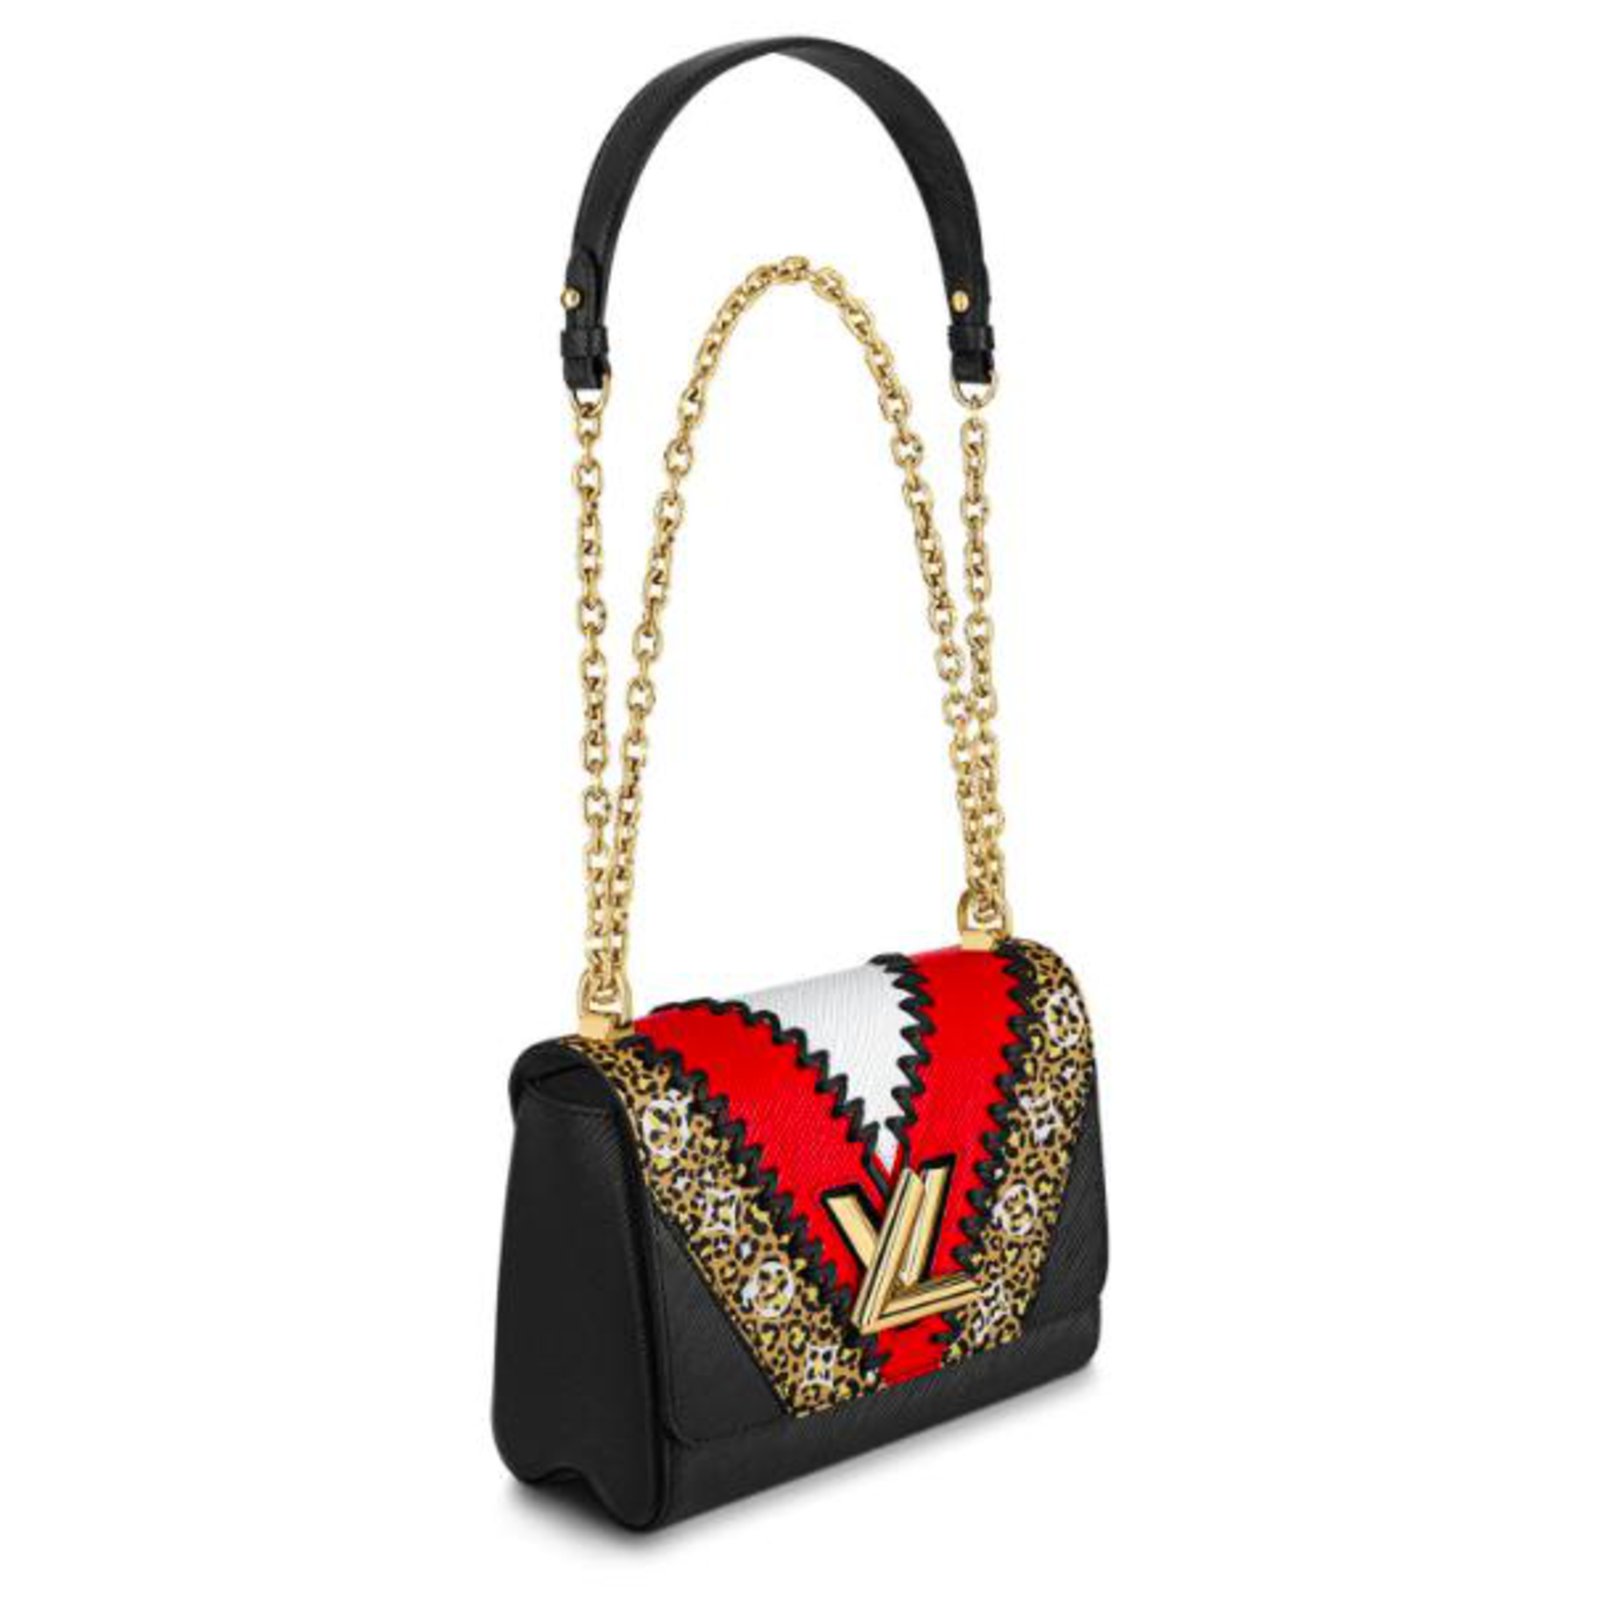 See the new editions of the Louis Vuitton Twist, presented by